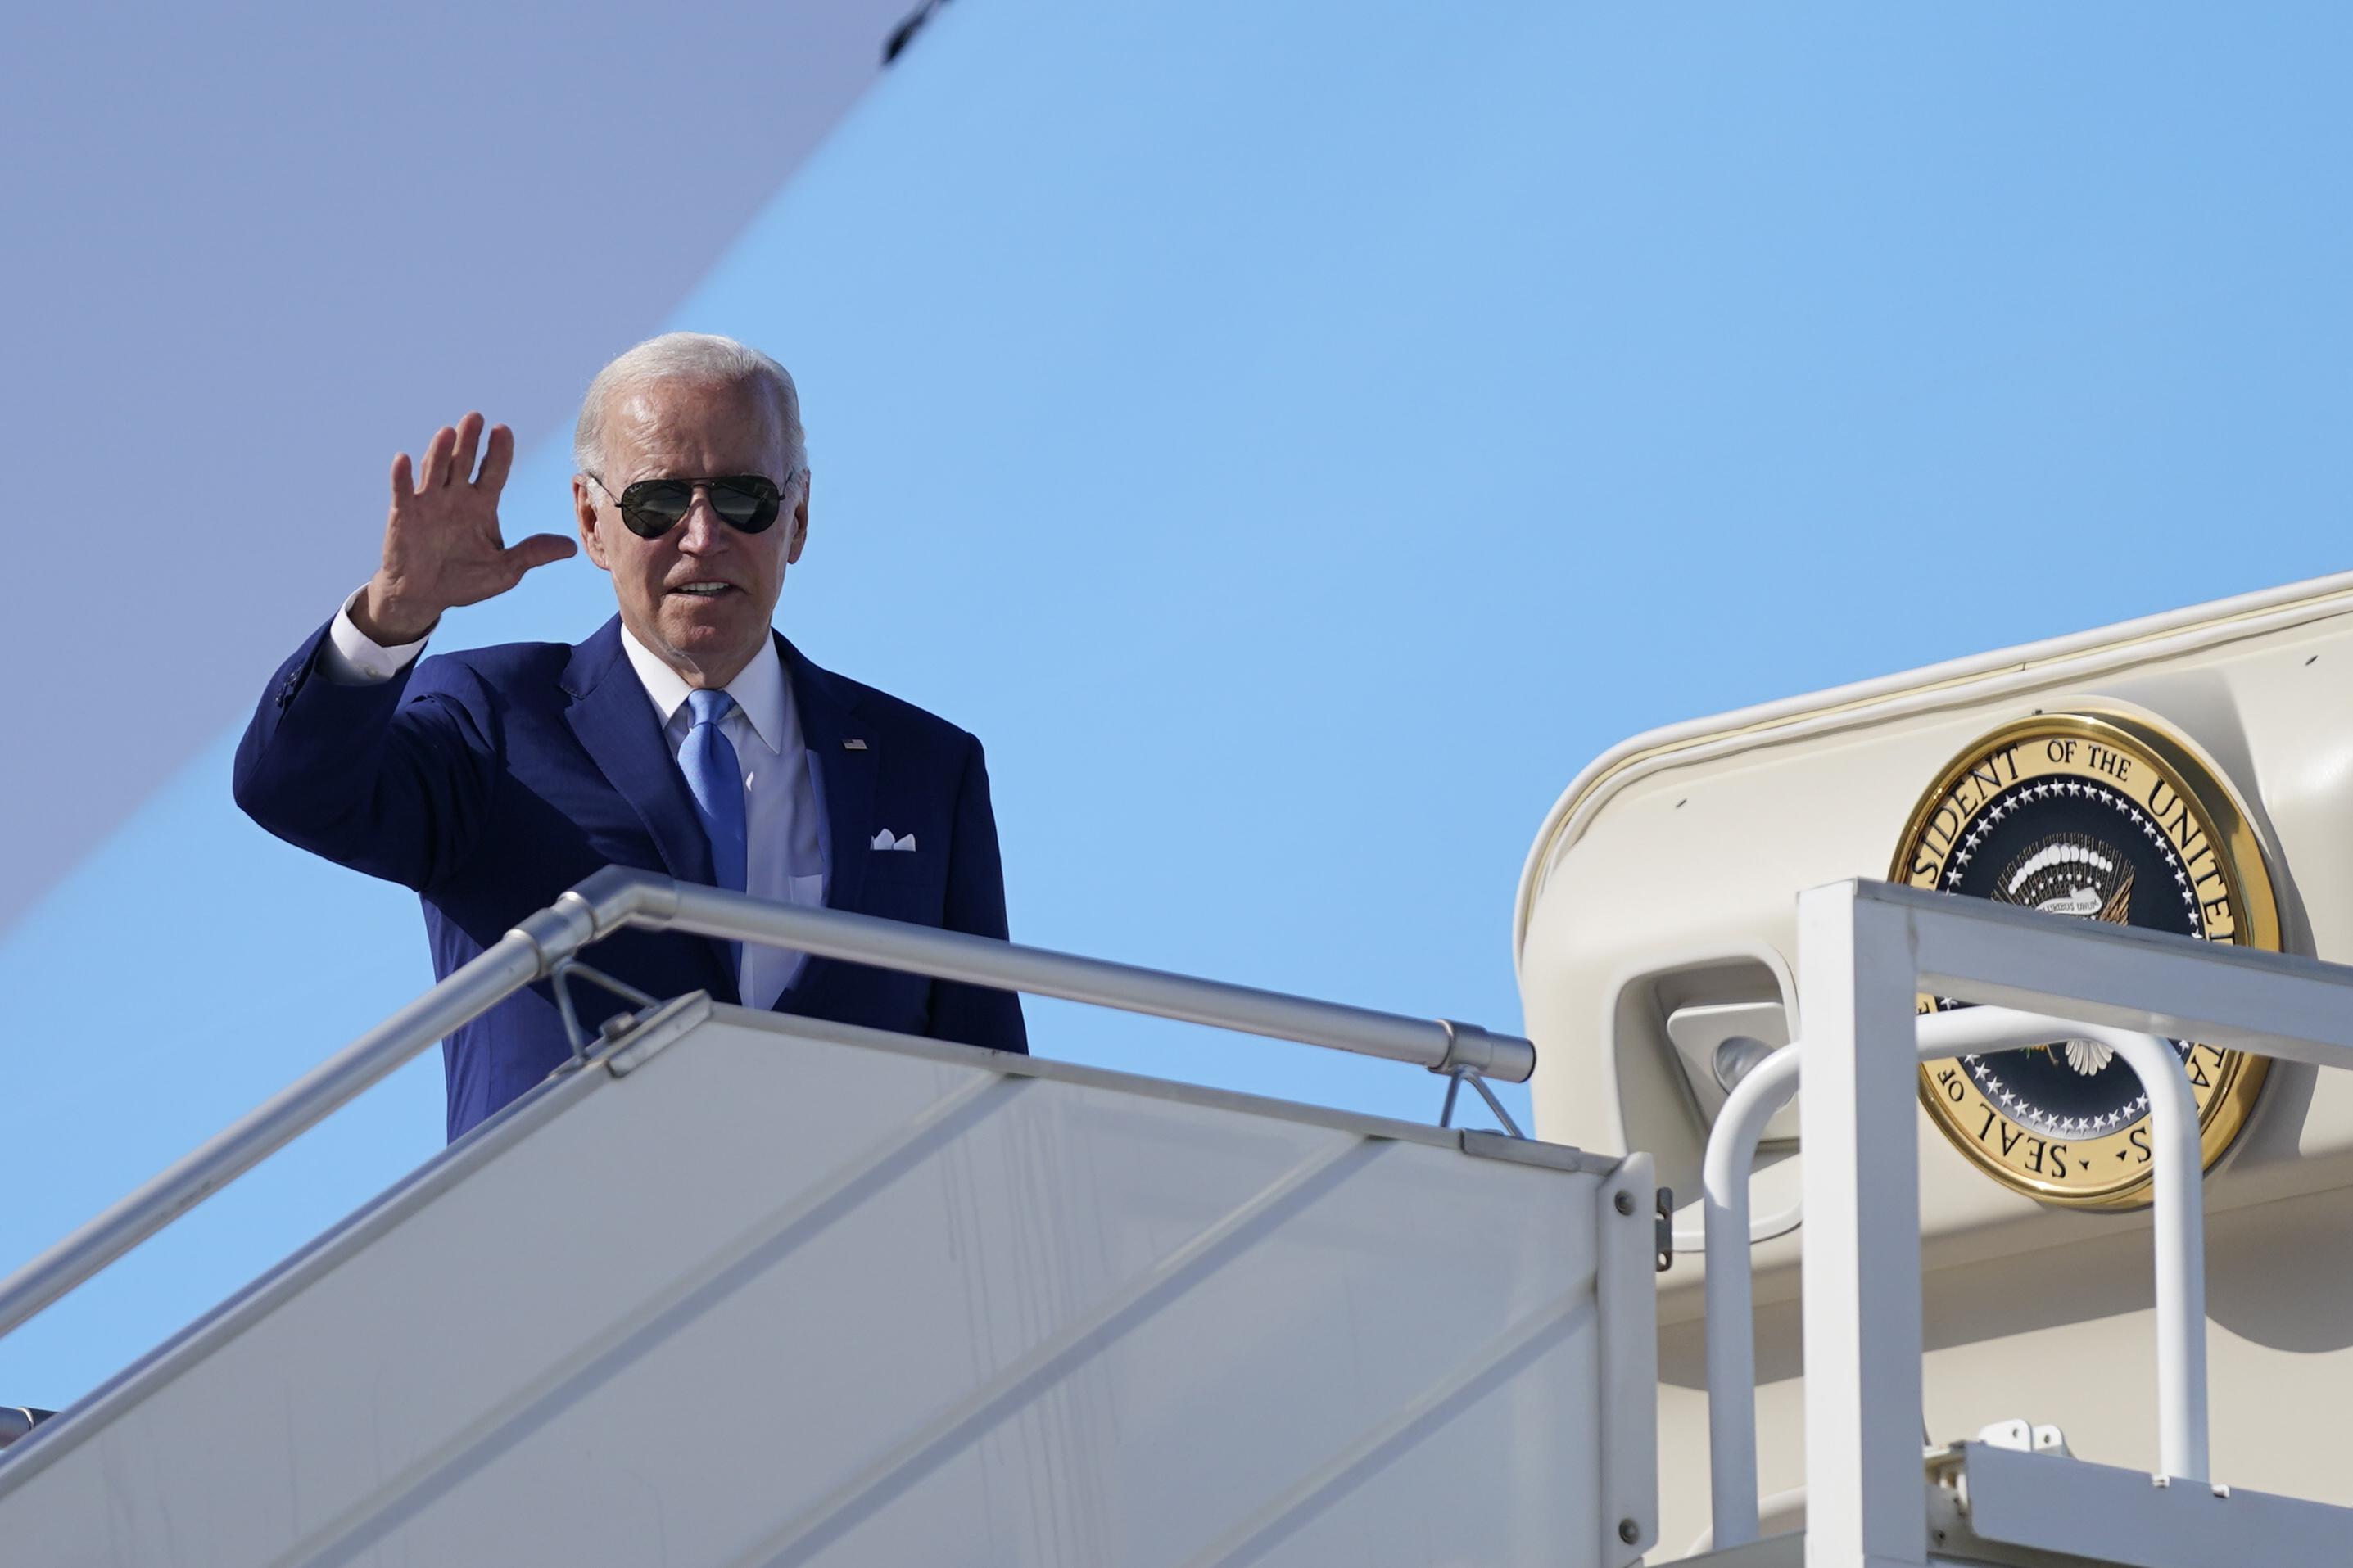 Biden's Mideast trip aimed at reassuring wary leaders